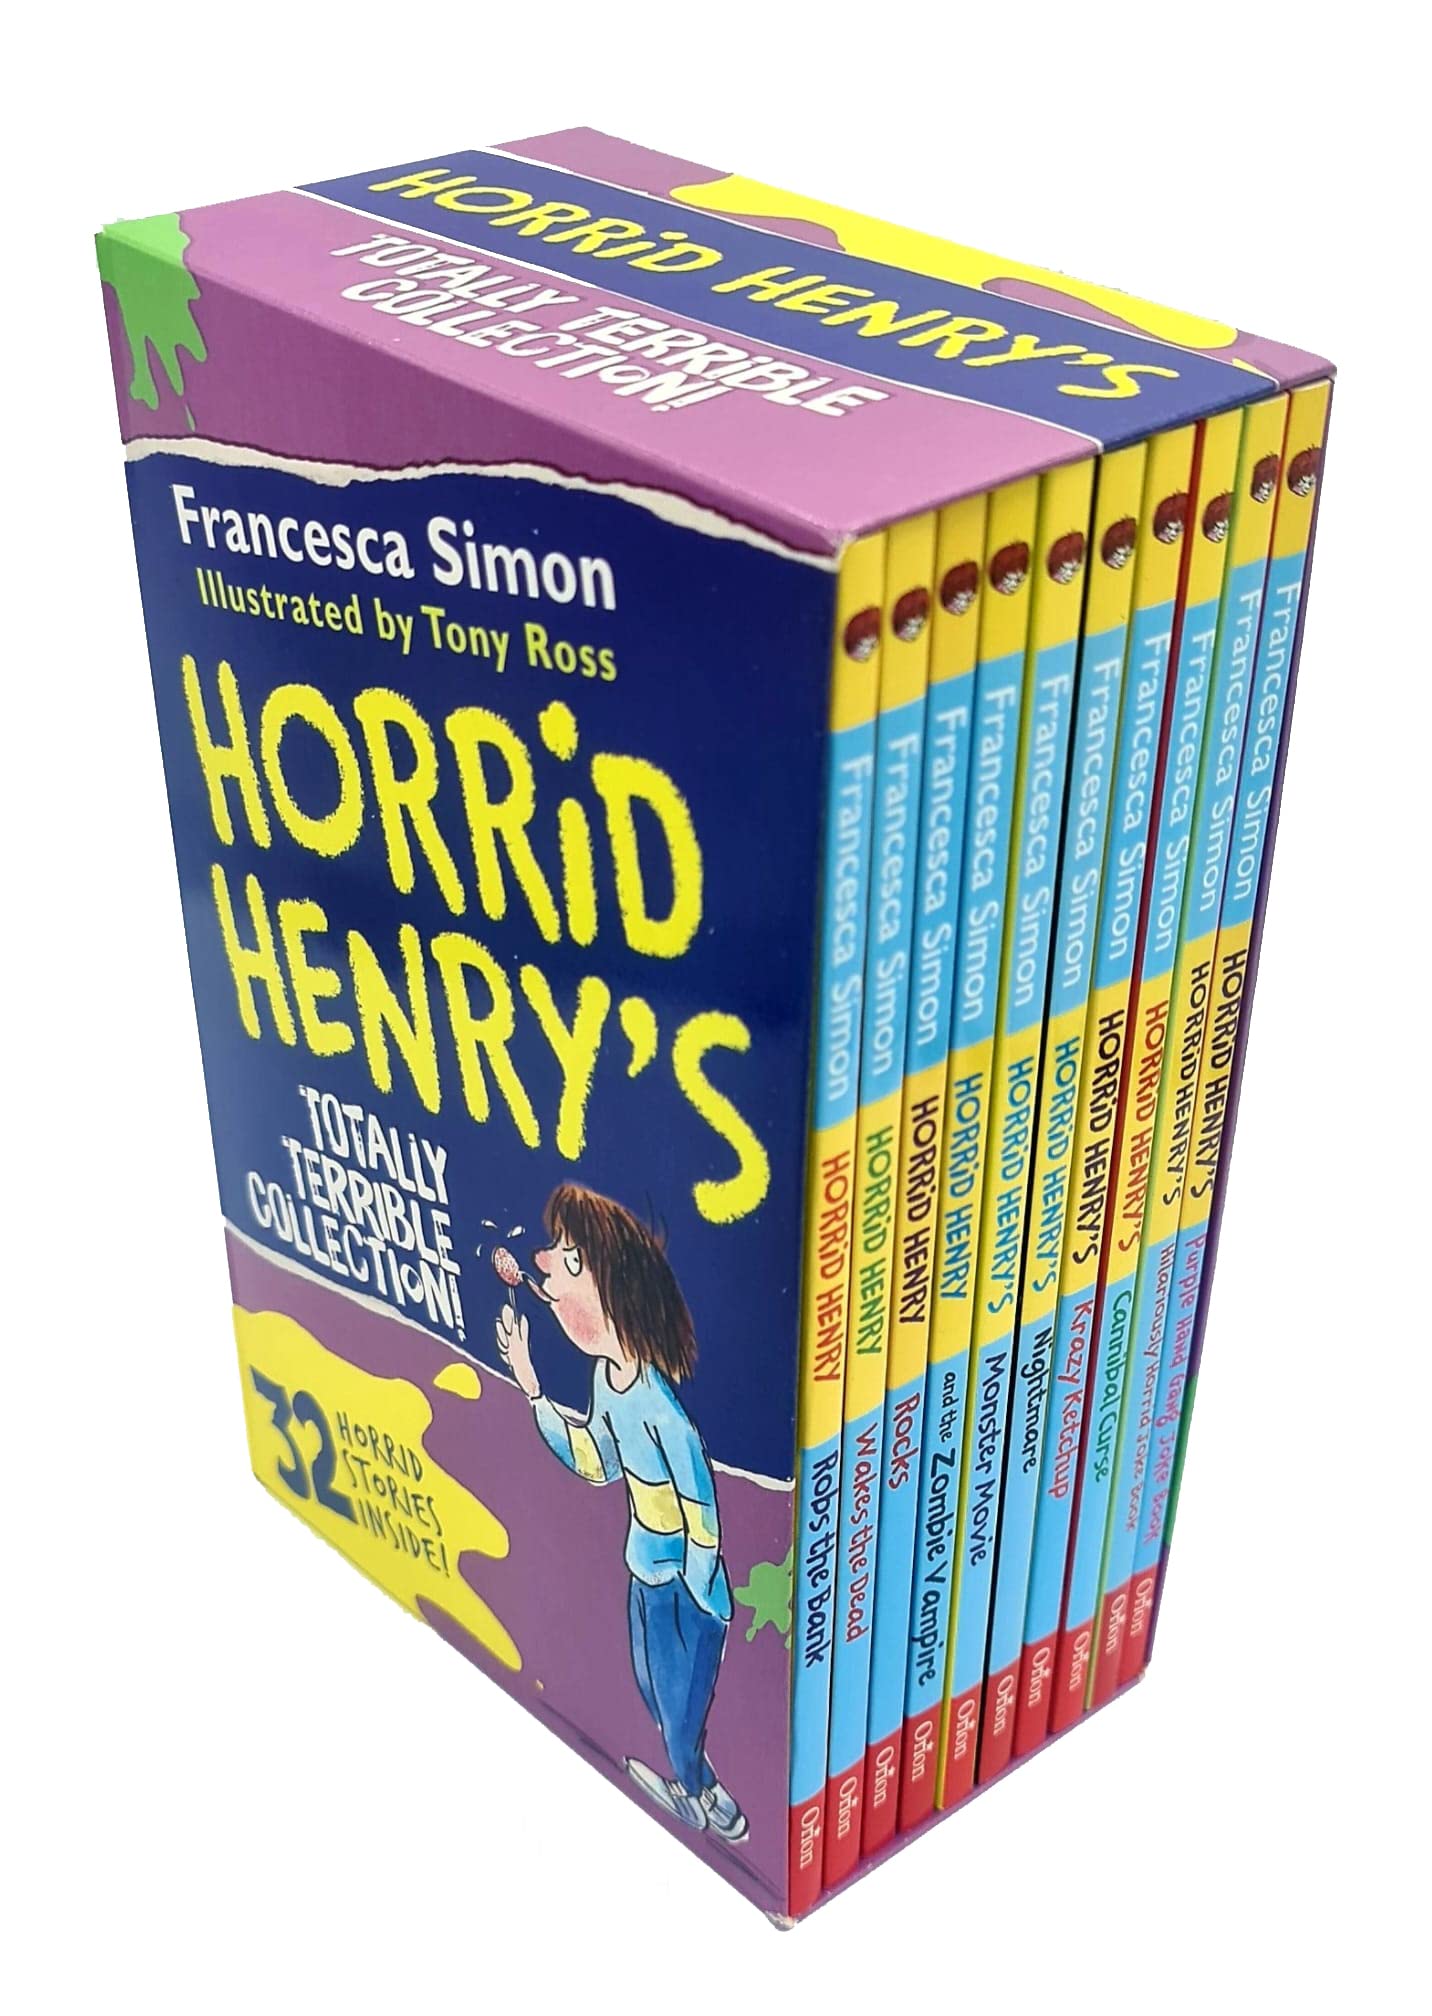 Horrid Henry's Totally Terrible Collection 10 Books Box Set by Francesca Simon Paperback - Lets Buy Books